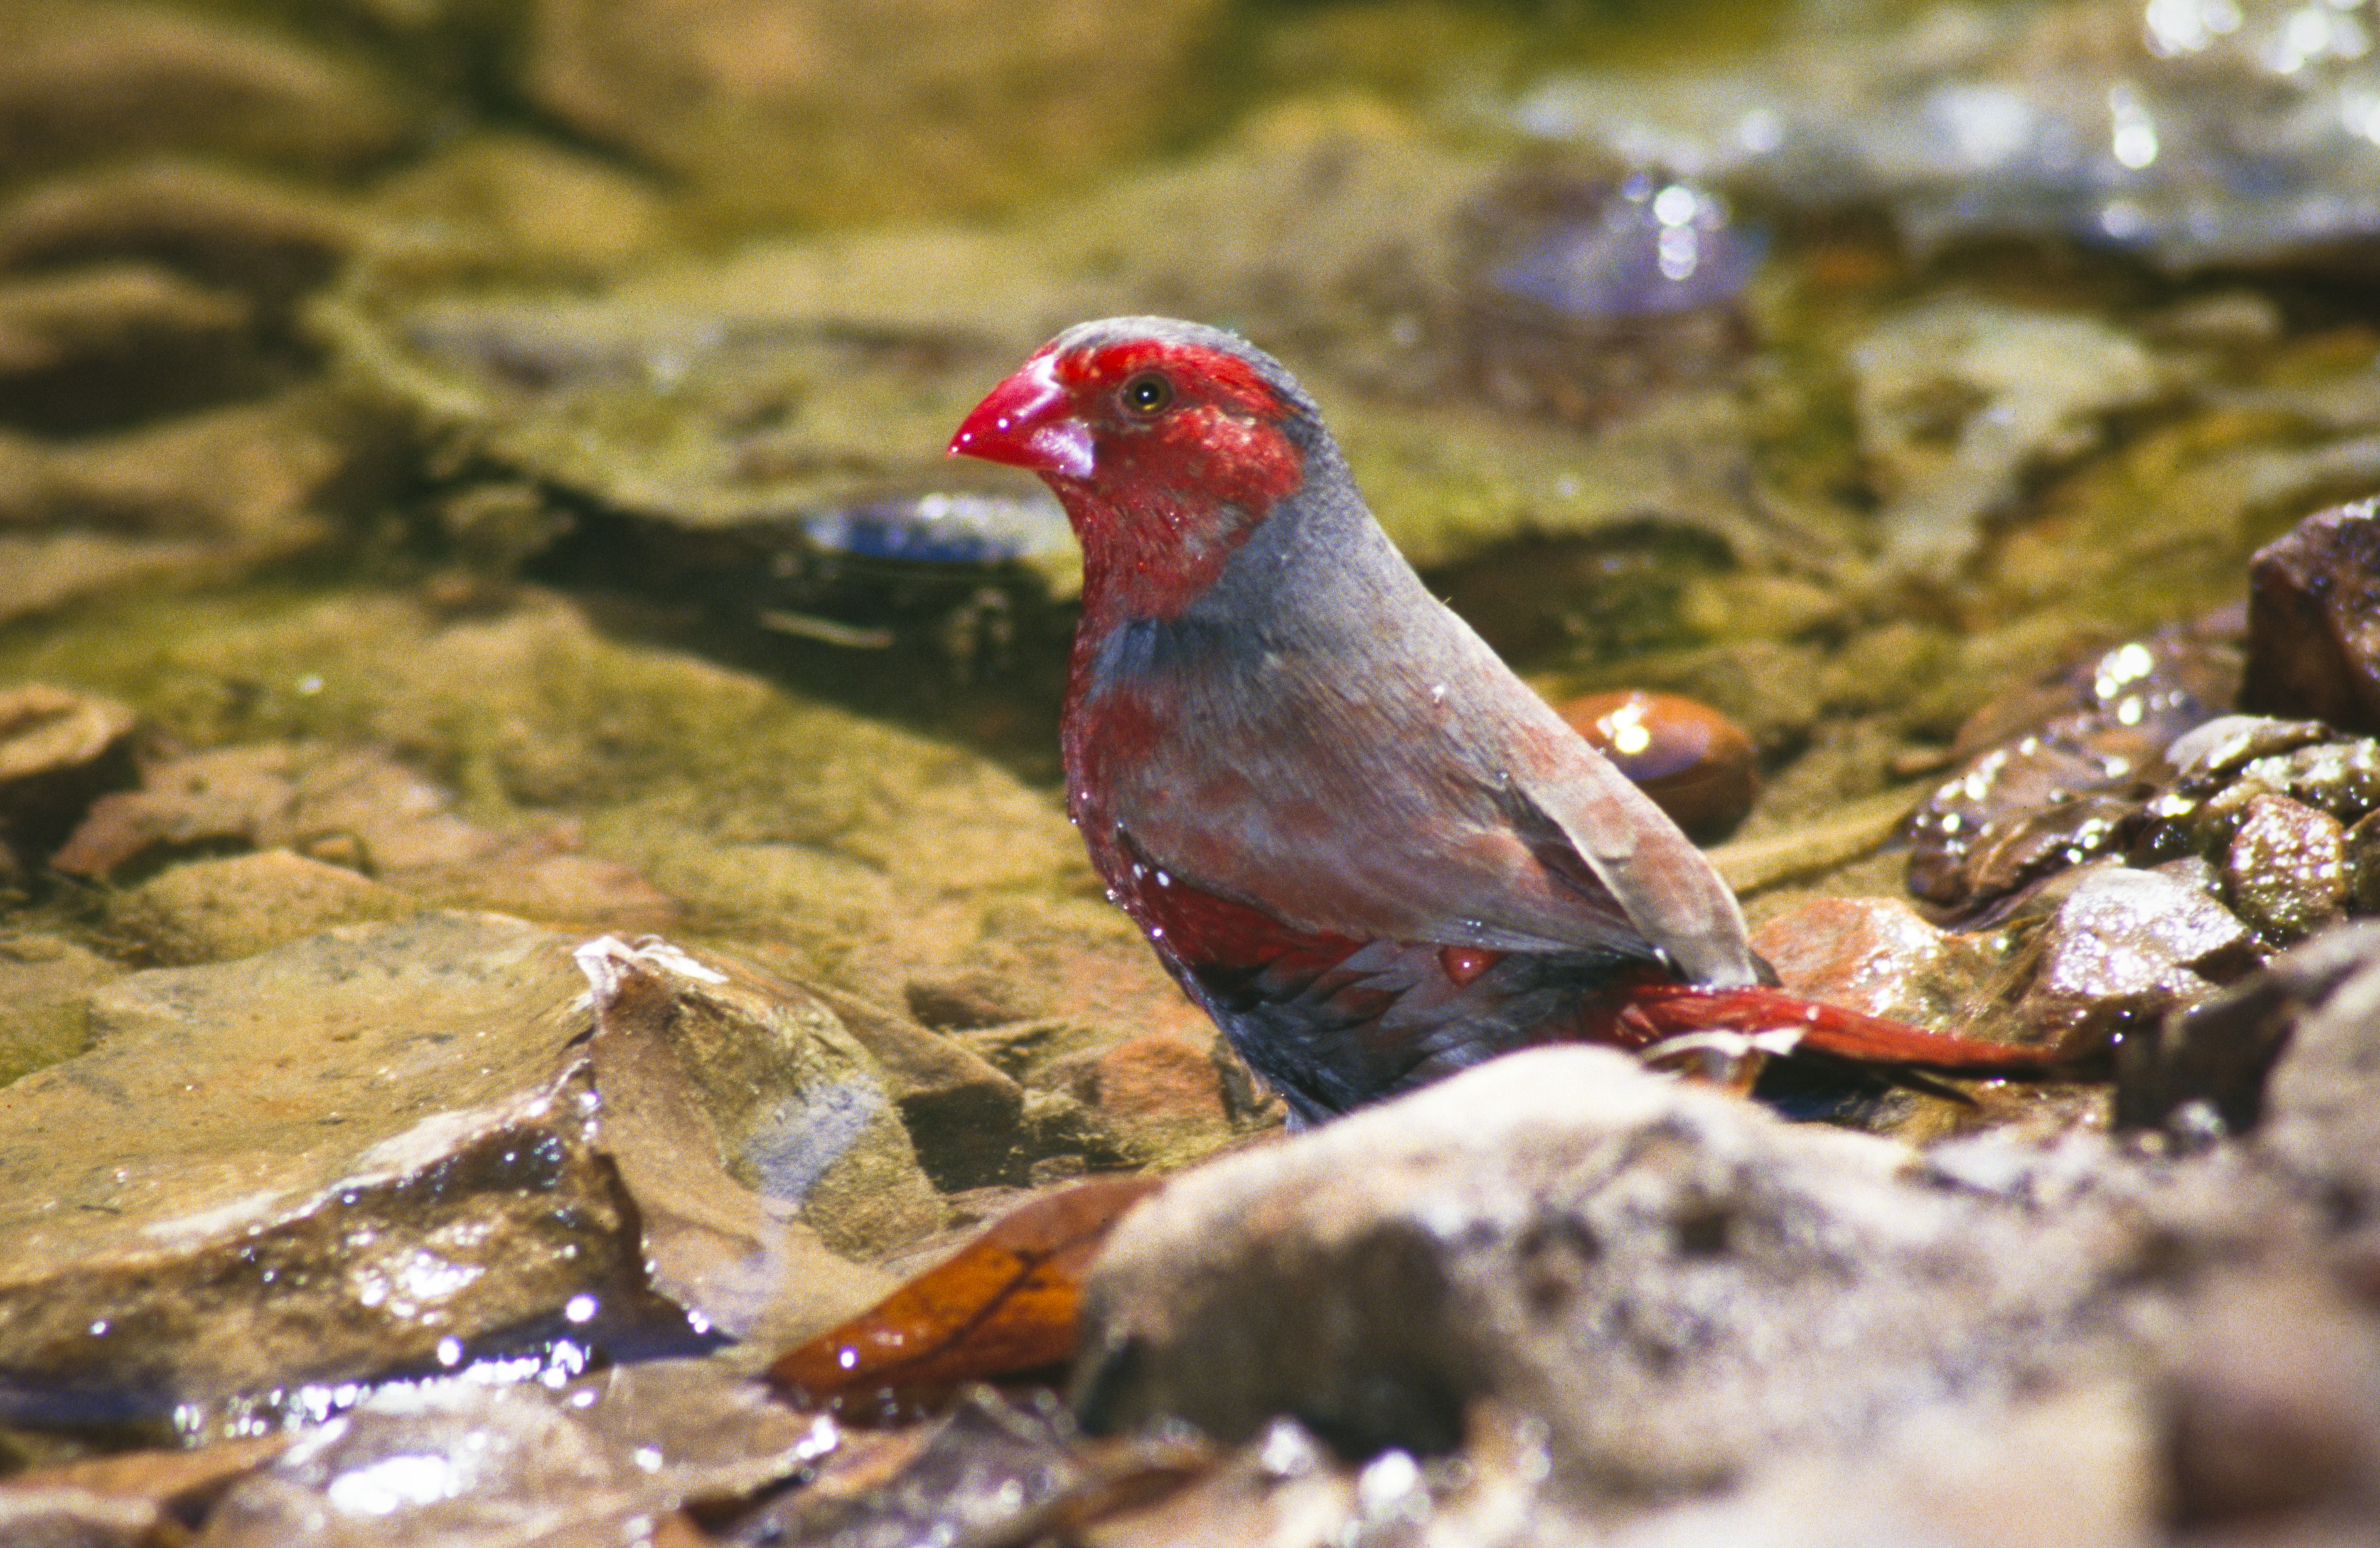 Crimson finch, Photo by Queensland Government